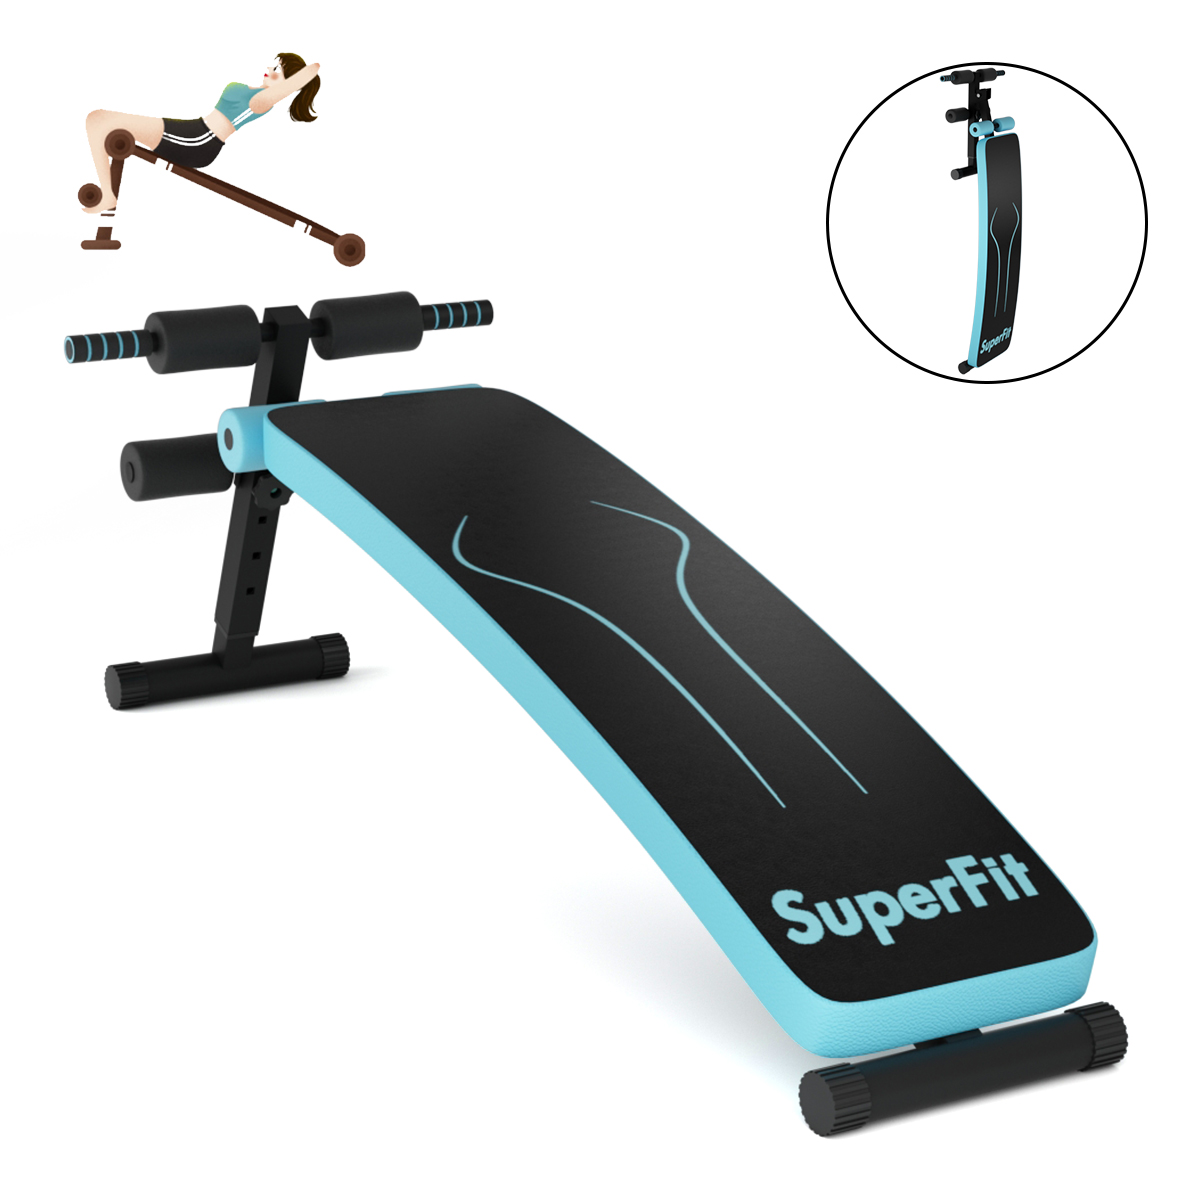 Costway SuperFit Folding Weight Bench Adjustable Sit-up Board Workout Slant Bench Blue